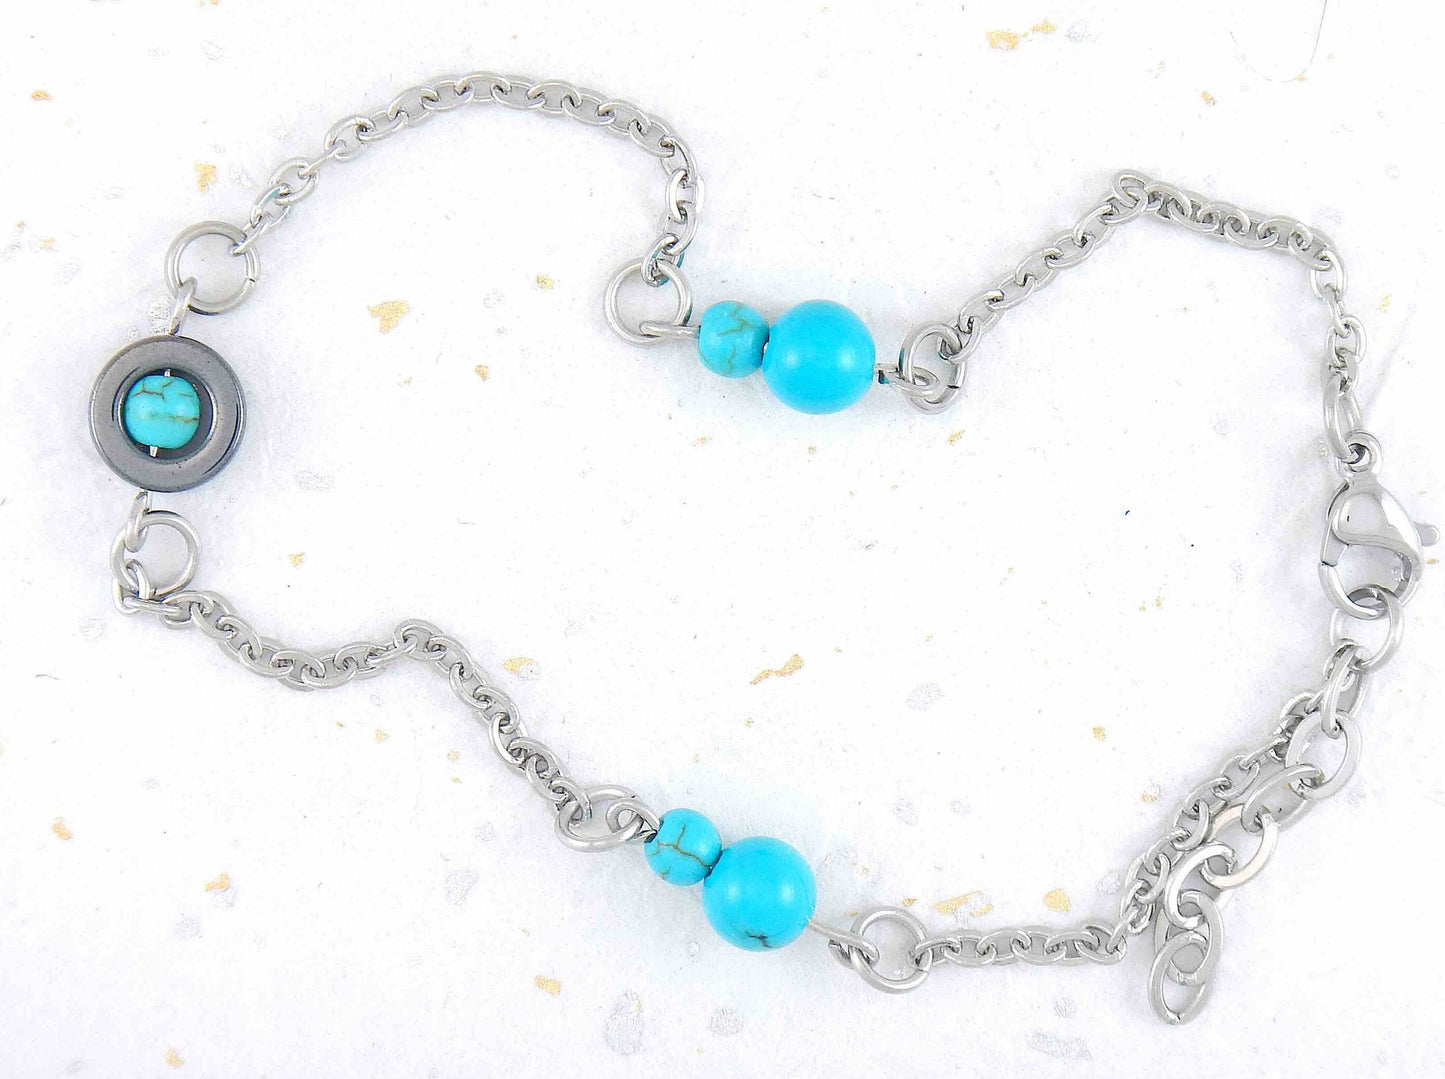 Anklet with turquoise-coloured howlite beads and hematite ring on hypoallergenic stainless steel chain